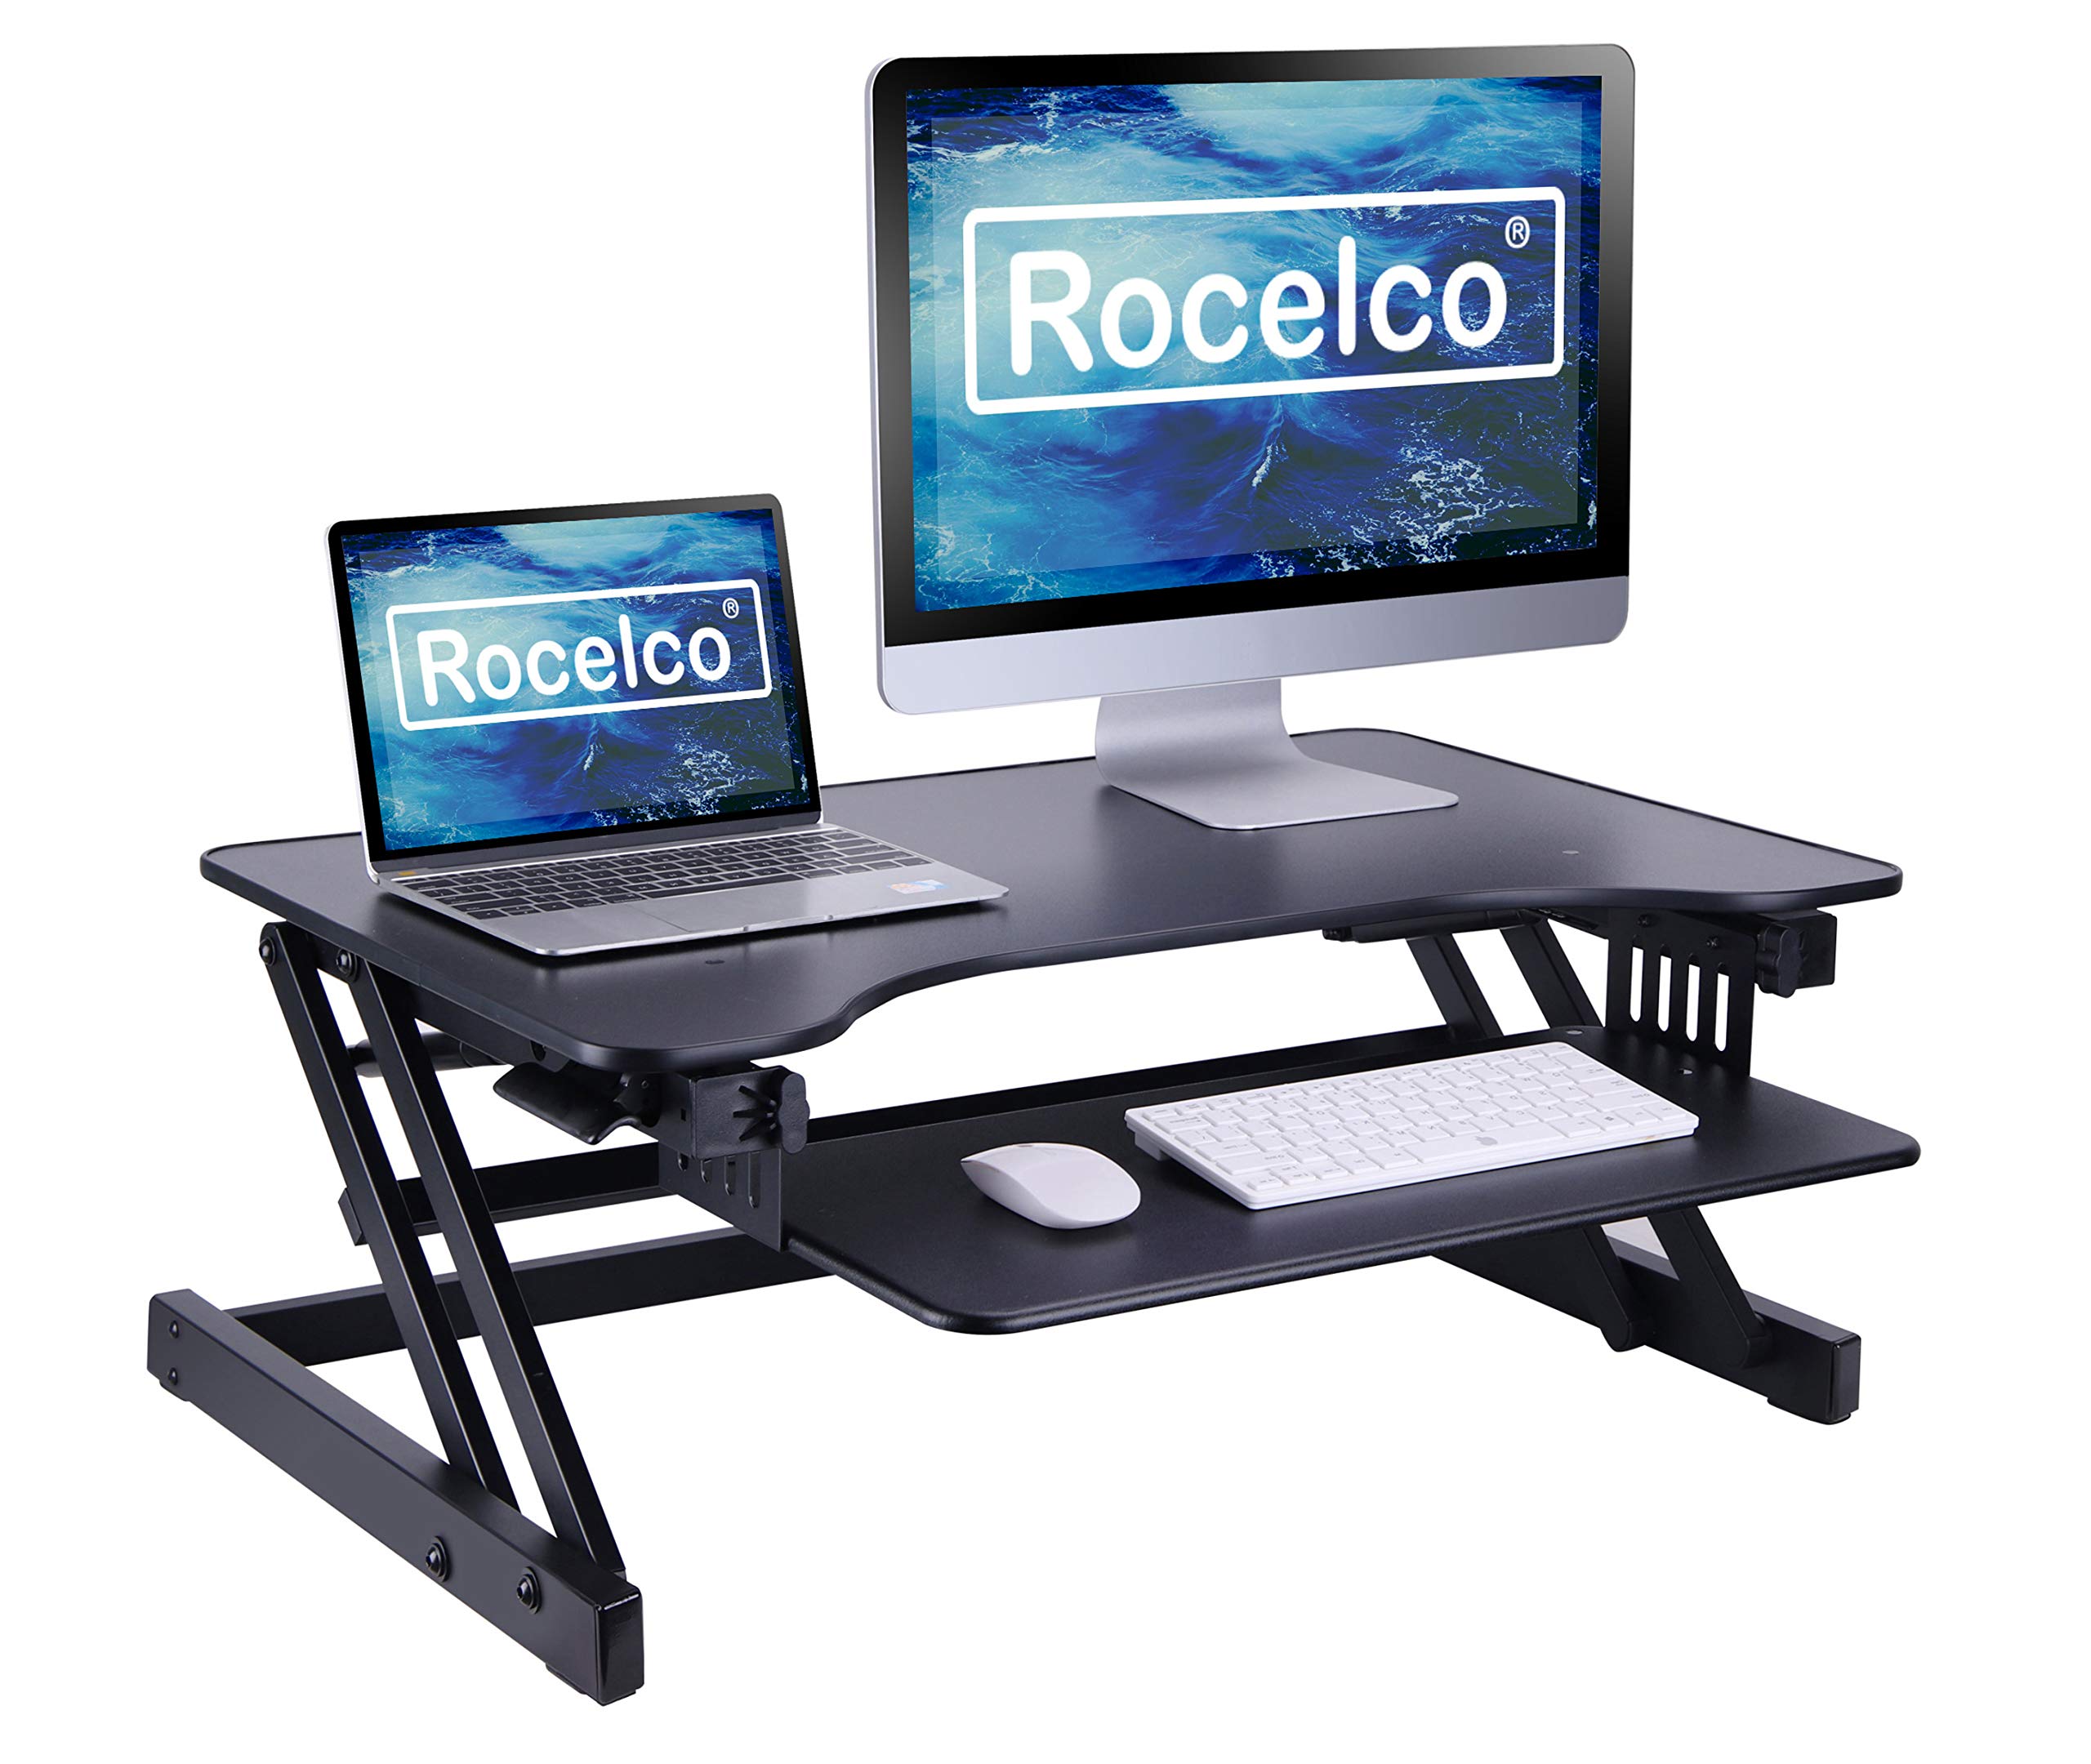 Rocelco 32" Height Adjustable Standing Desk Converter - Quick Sit Stand Up Dual Monitor Riser - Gas Spring Assist Tabletop Computer Workstation...